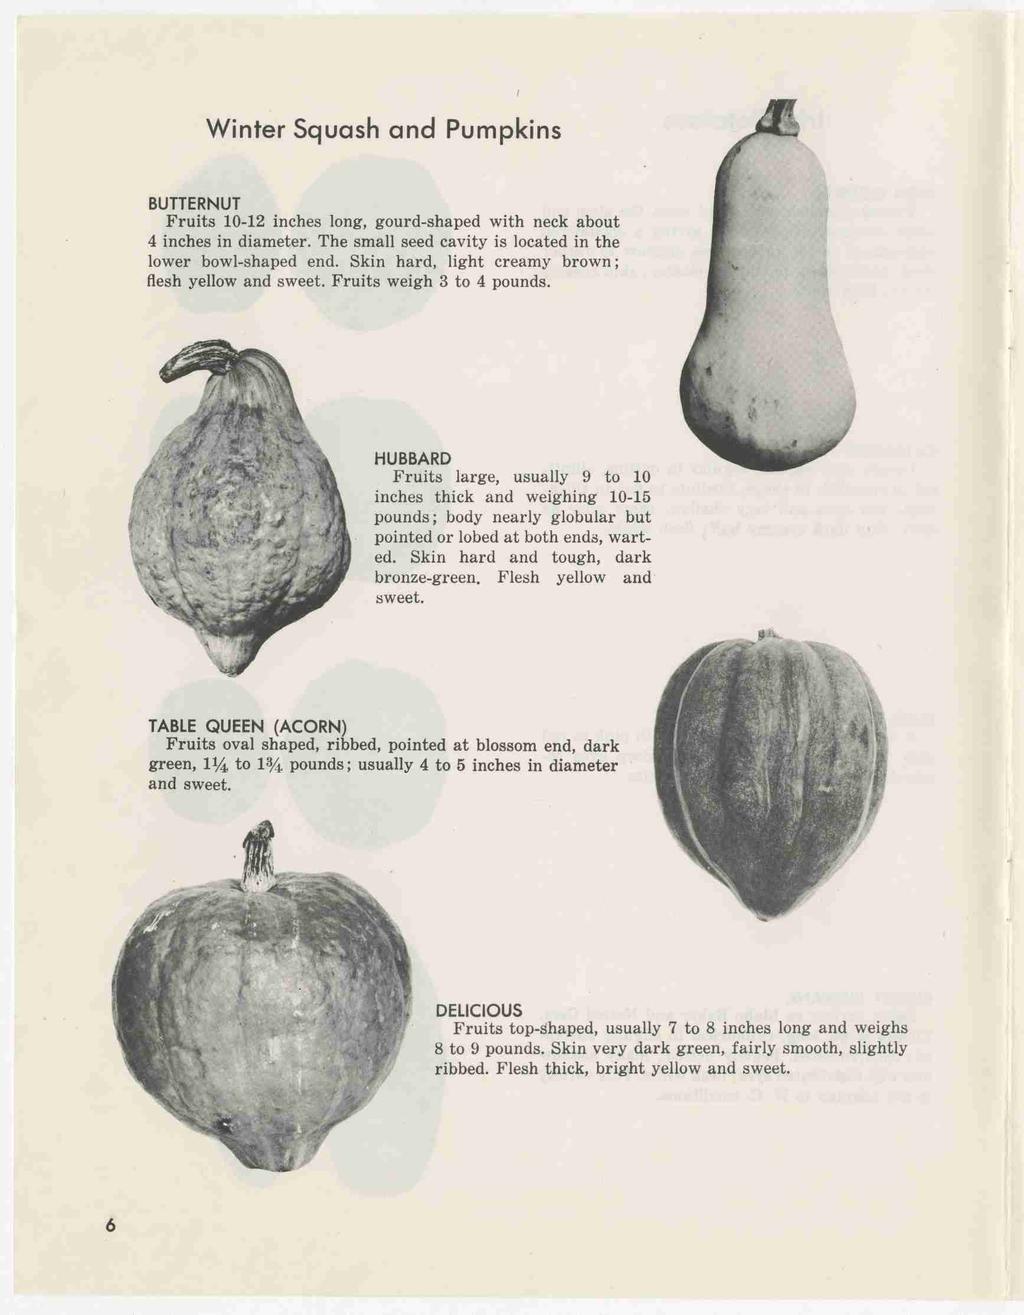 Winter Squash and Pumpkins 1 BUTTERNUT Fruits 10-12 inches long, gourd-shaped with neck about 4 inches in diameter; The small seed cavity is located in the lower bowl-shaped end.